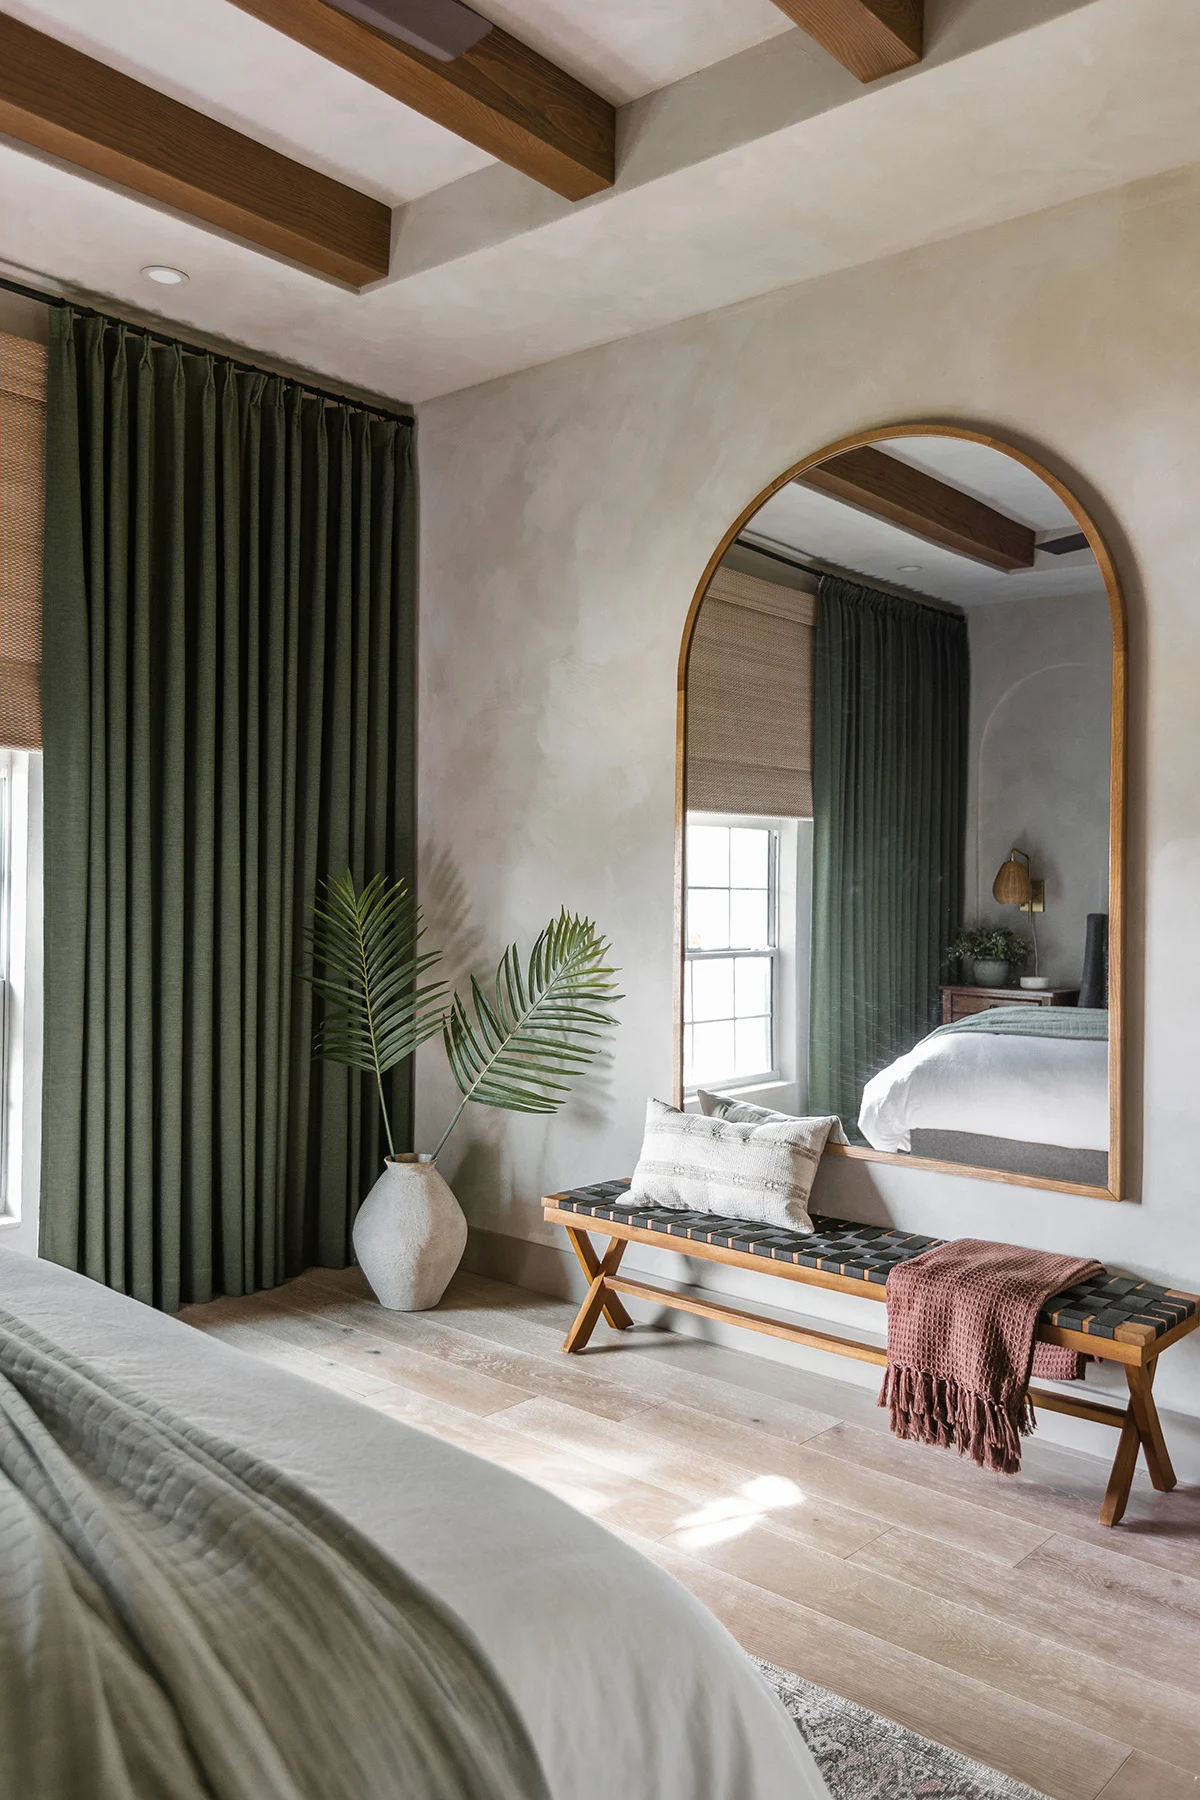 Dreams Bed Designs: Creating Tranquil Retreats for Restful Nights